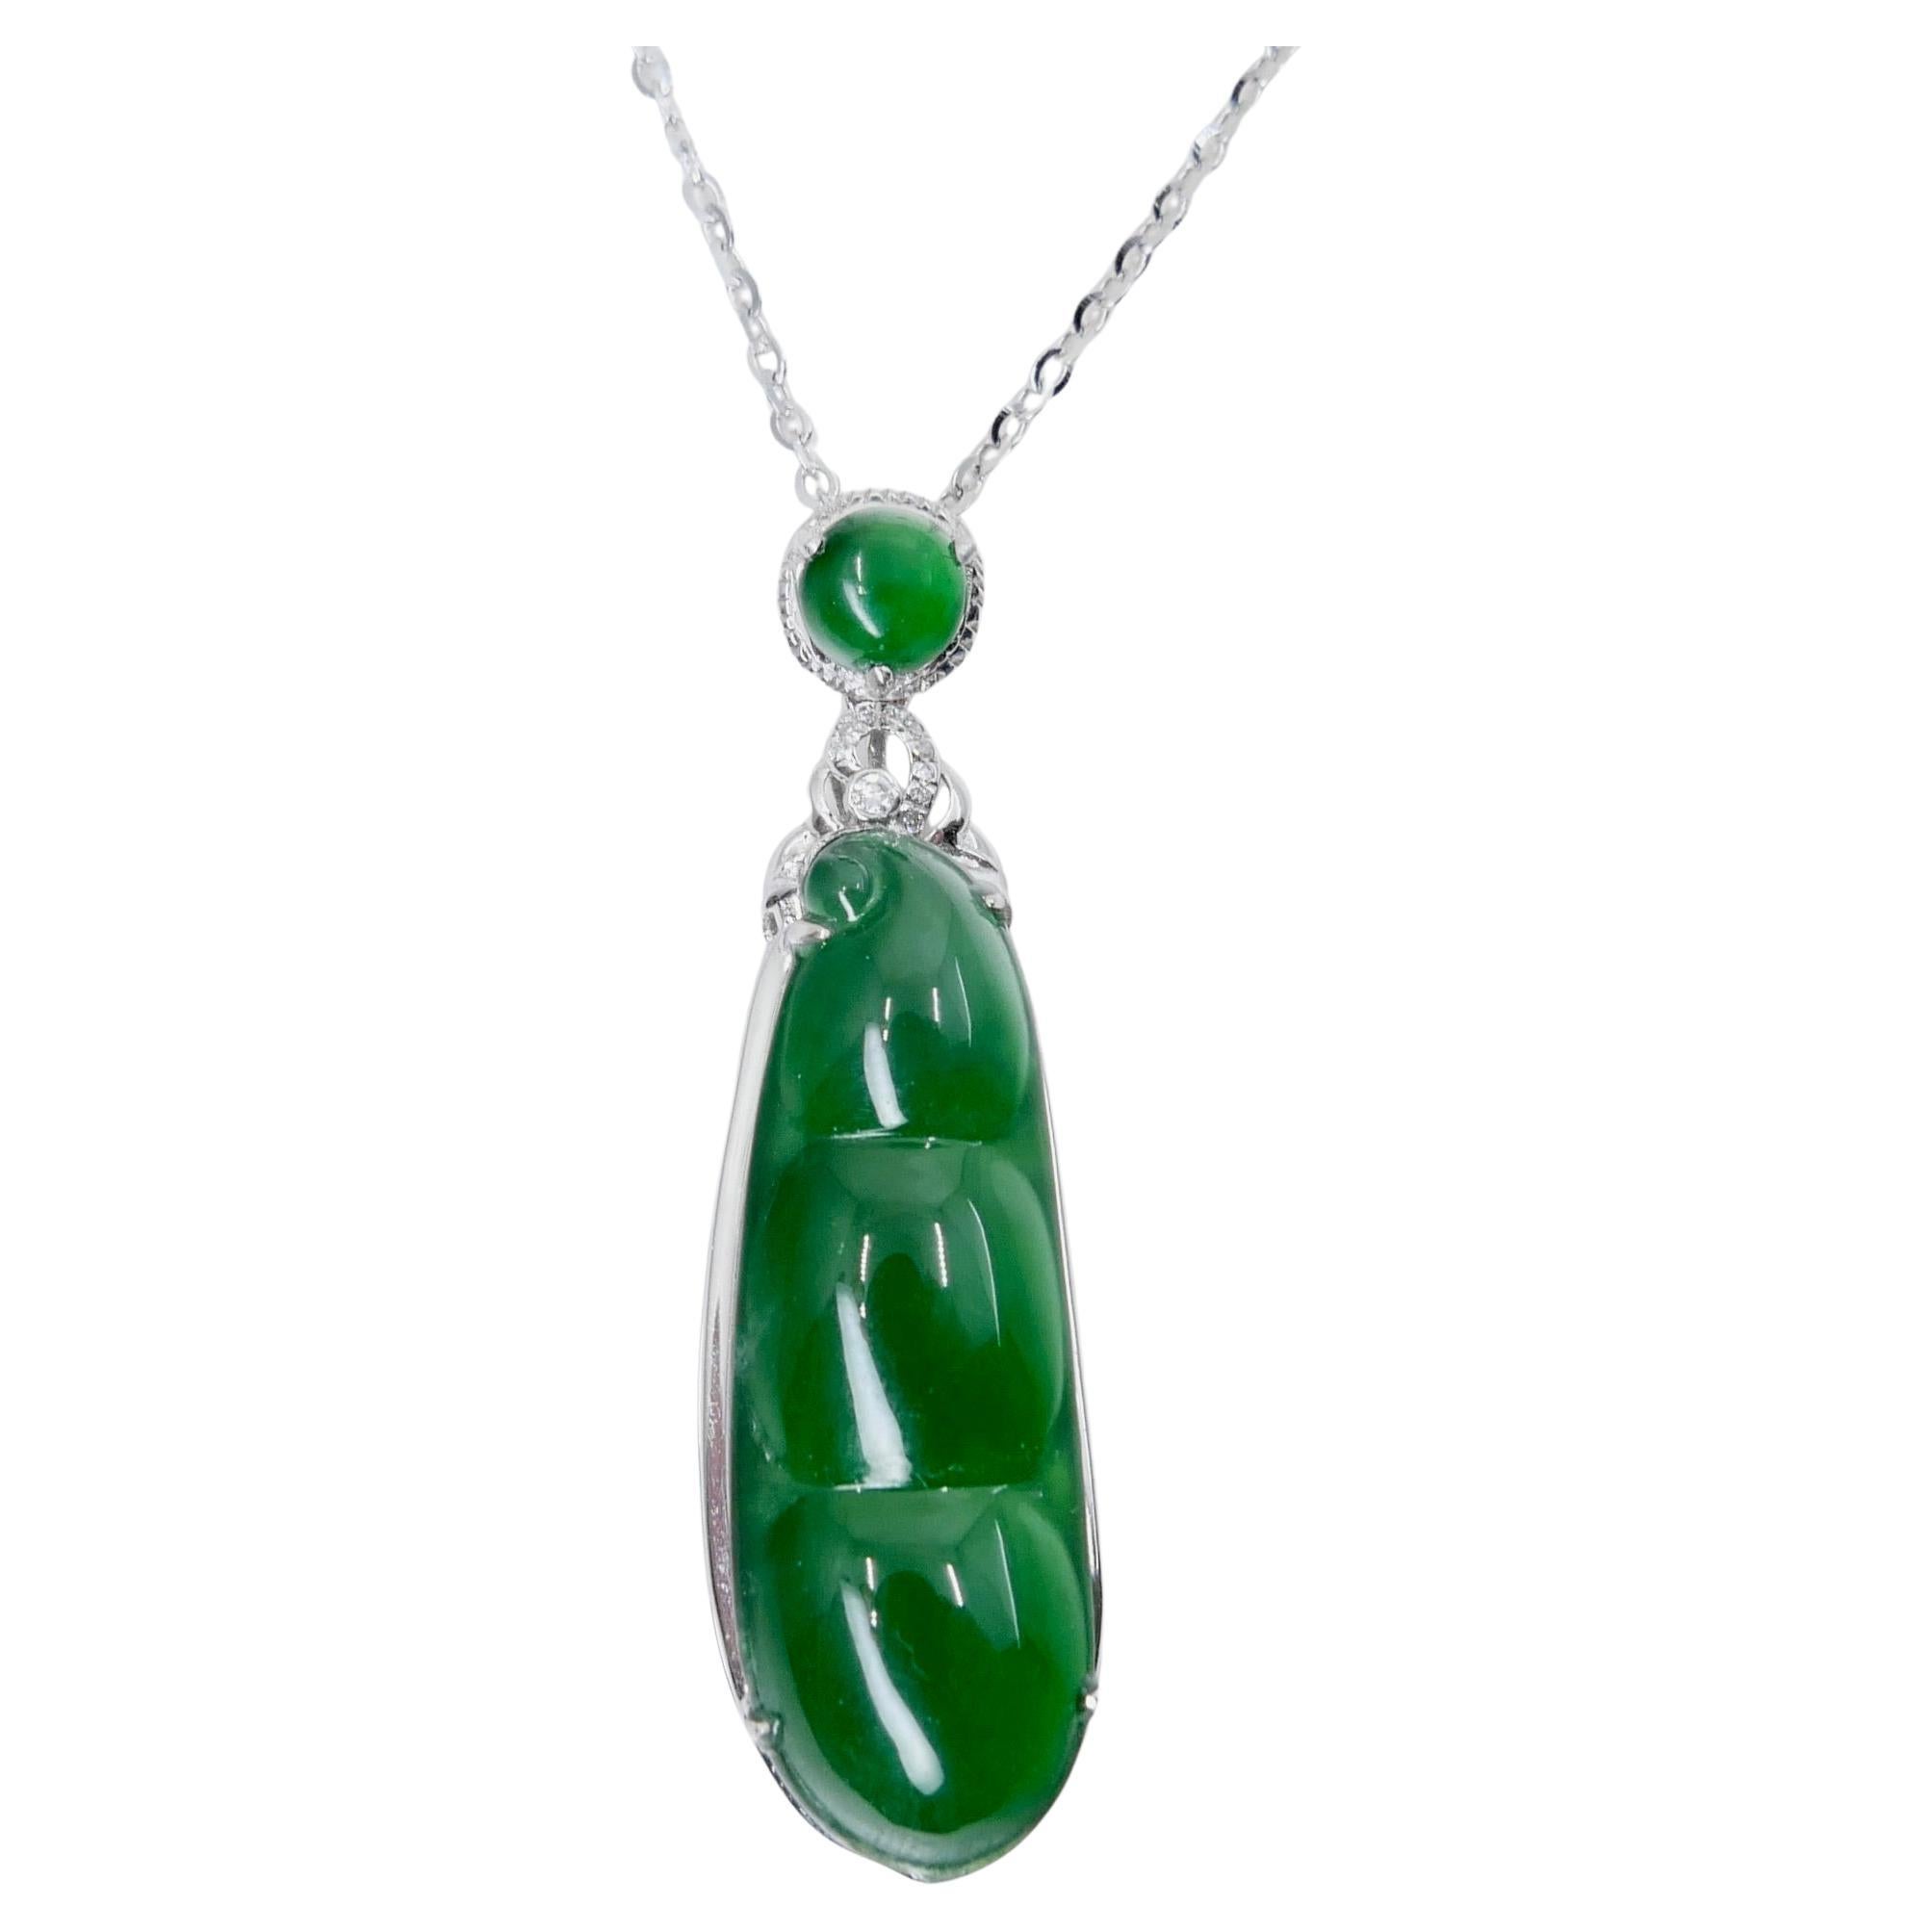 Certified Imperial Jade Peapod & Diamond Pendant Necklace. Collector's Item. For Sale